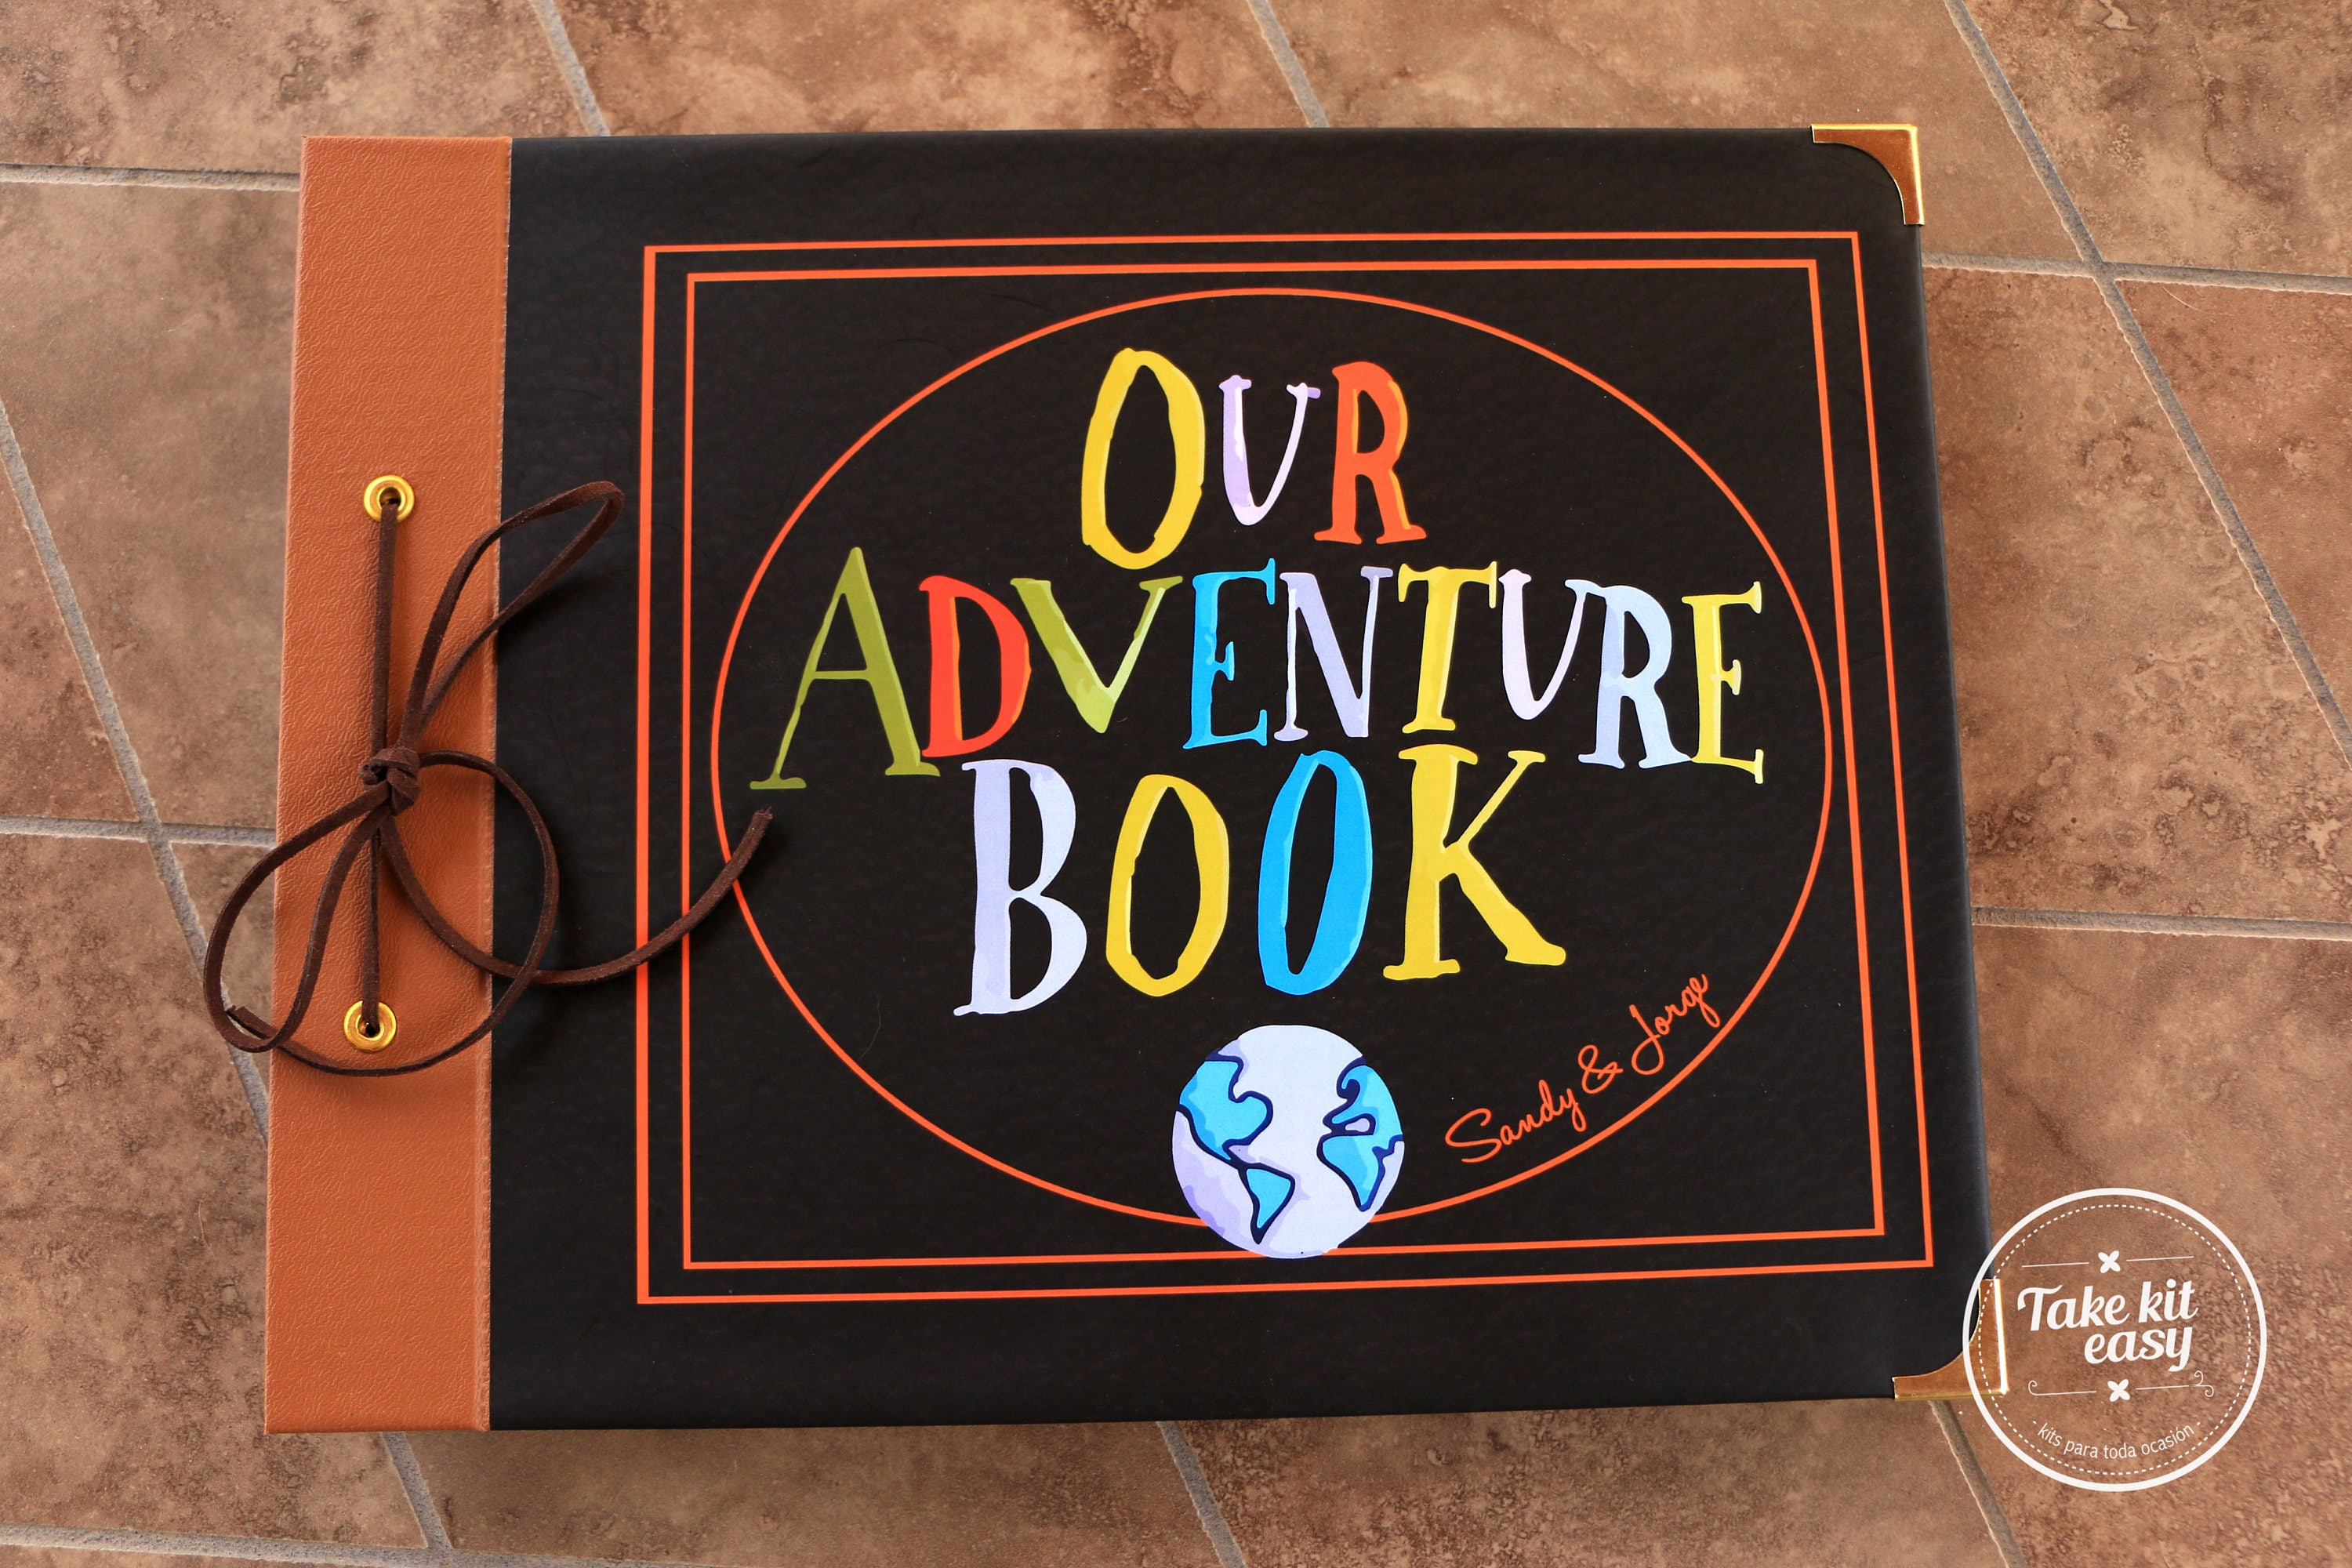 Our Adventure book.